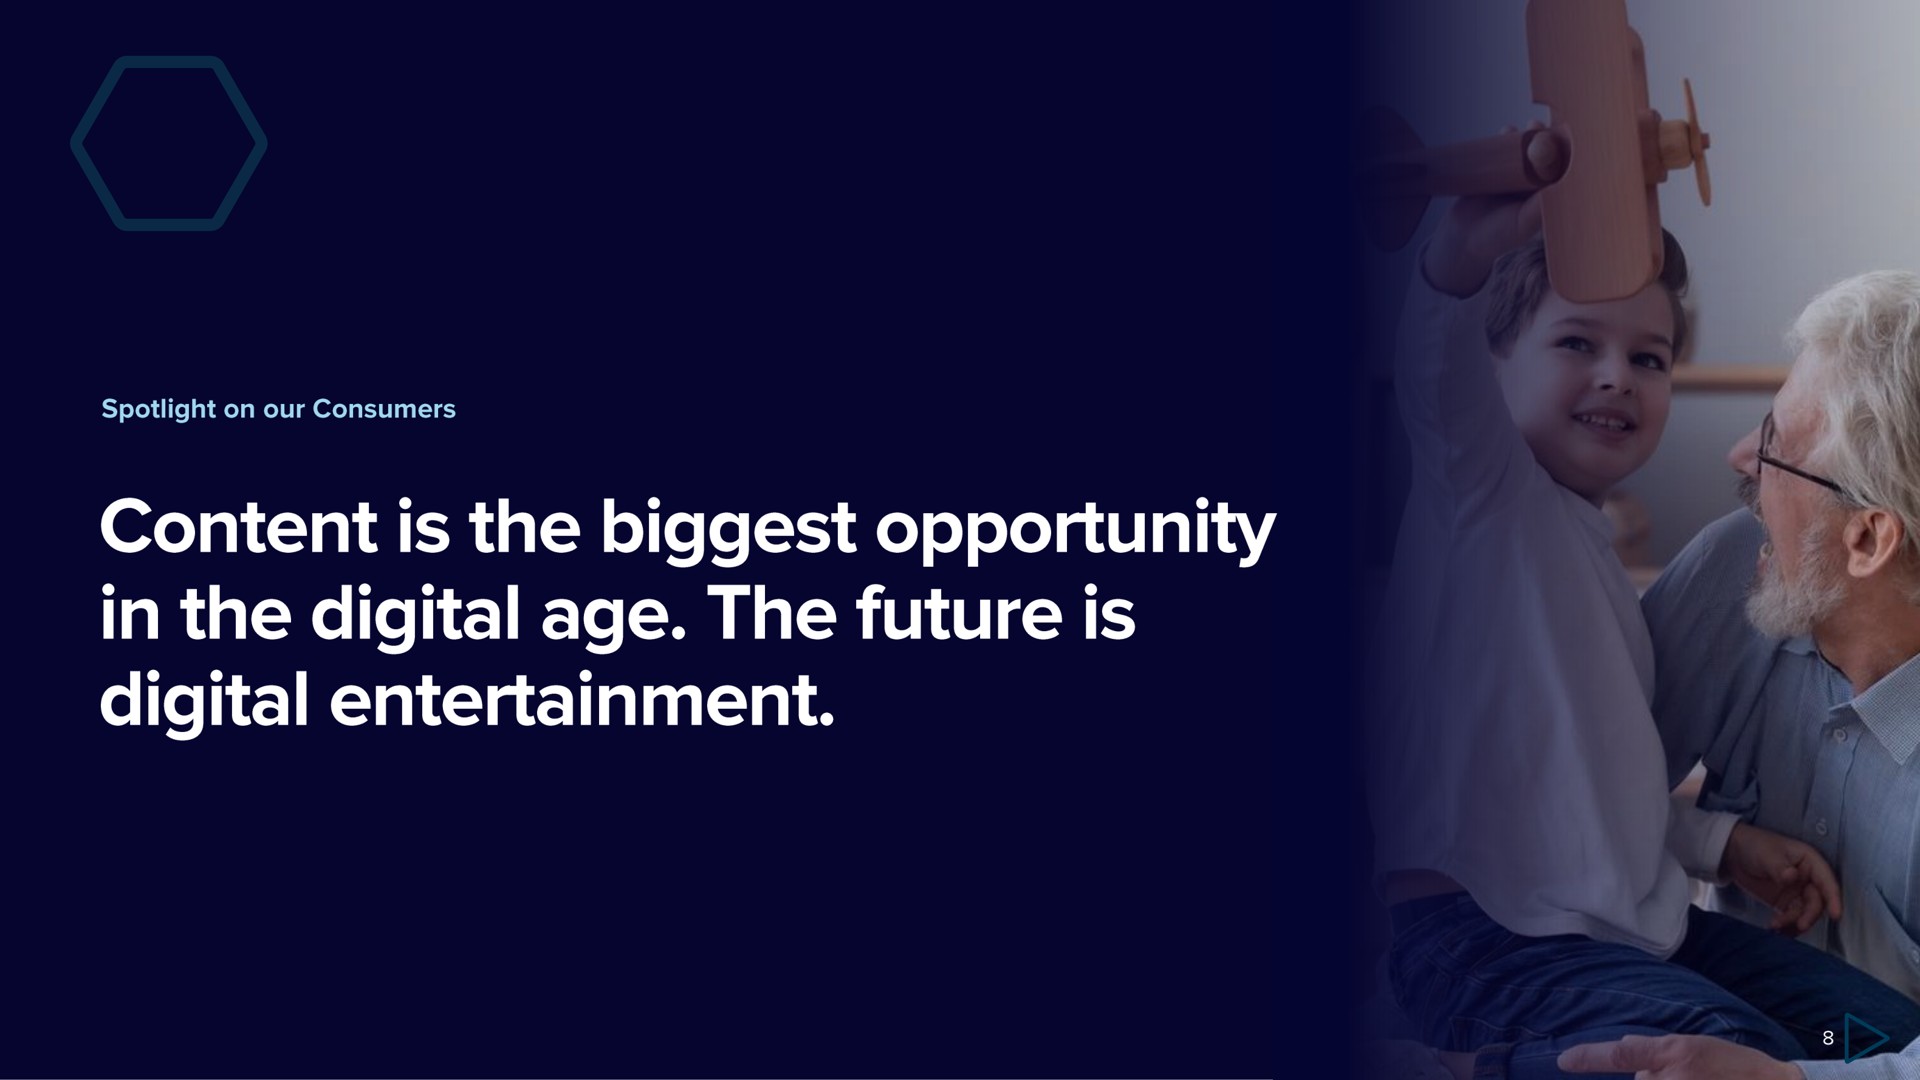 content is the biggest opportunity in the digital age the future is digital entertainment | Azerion